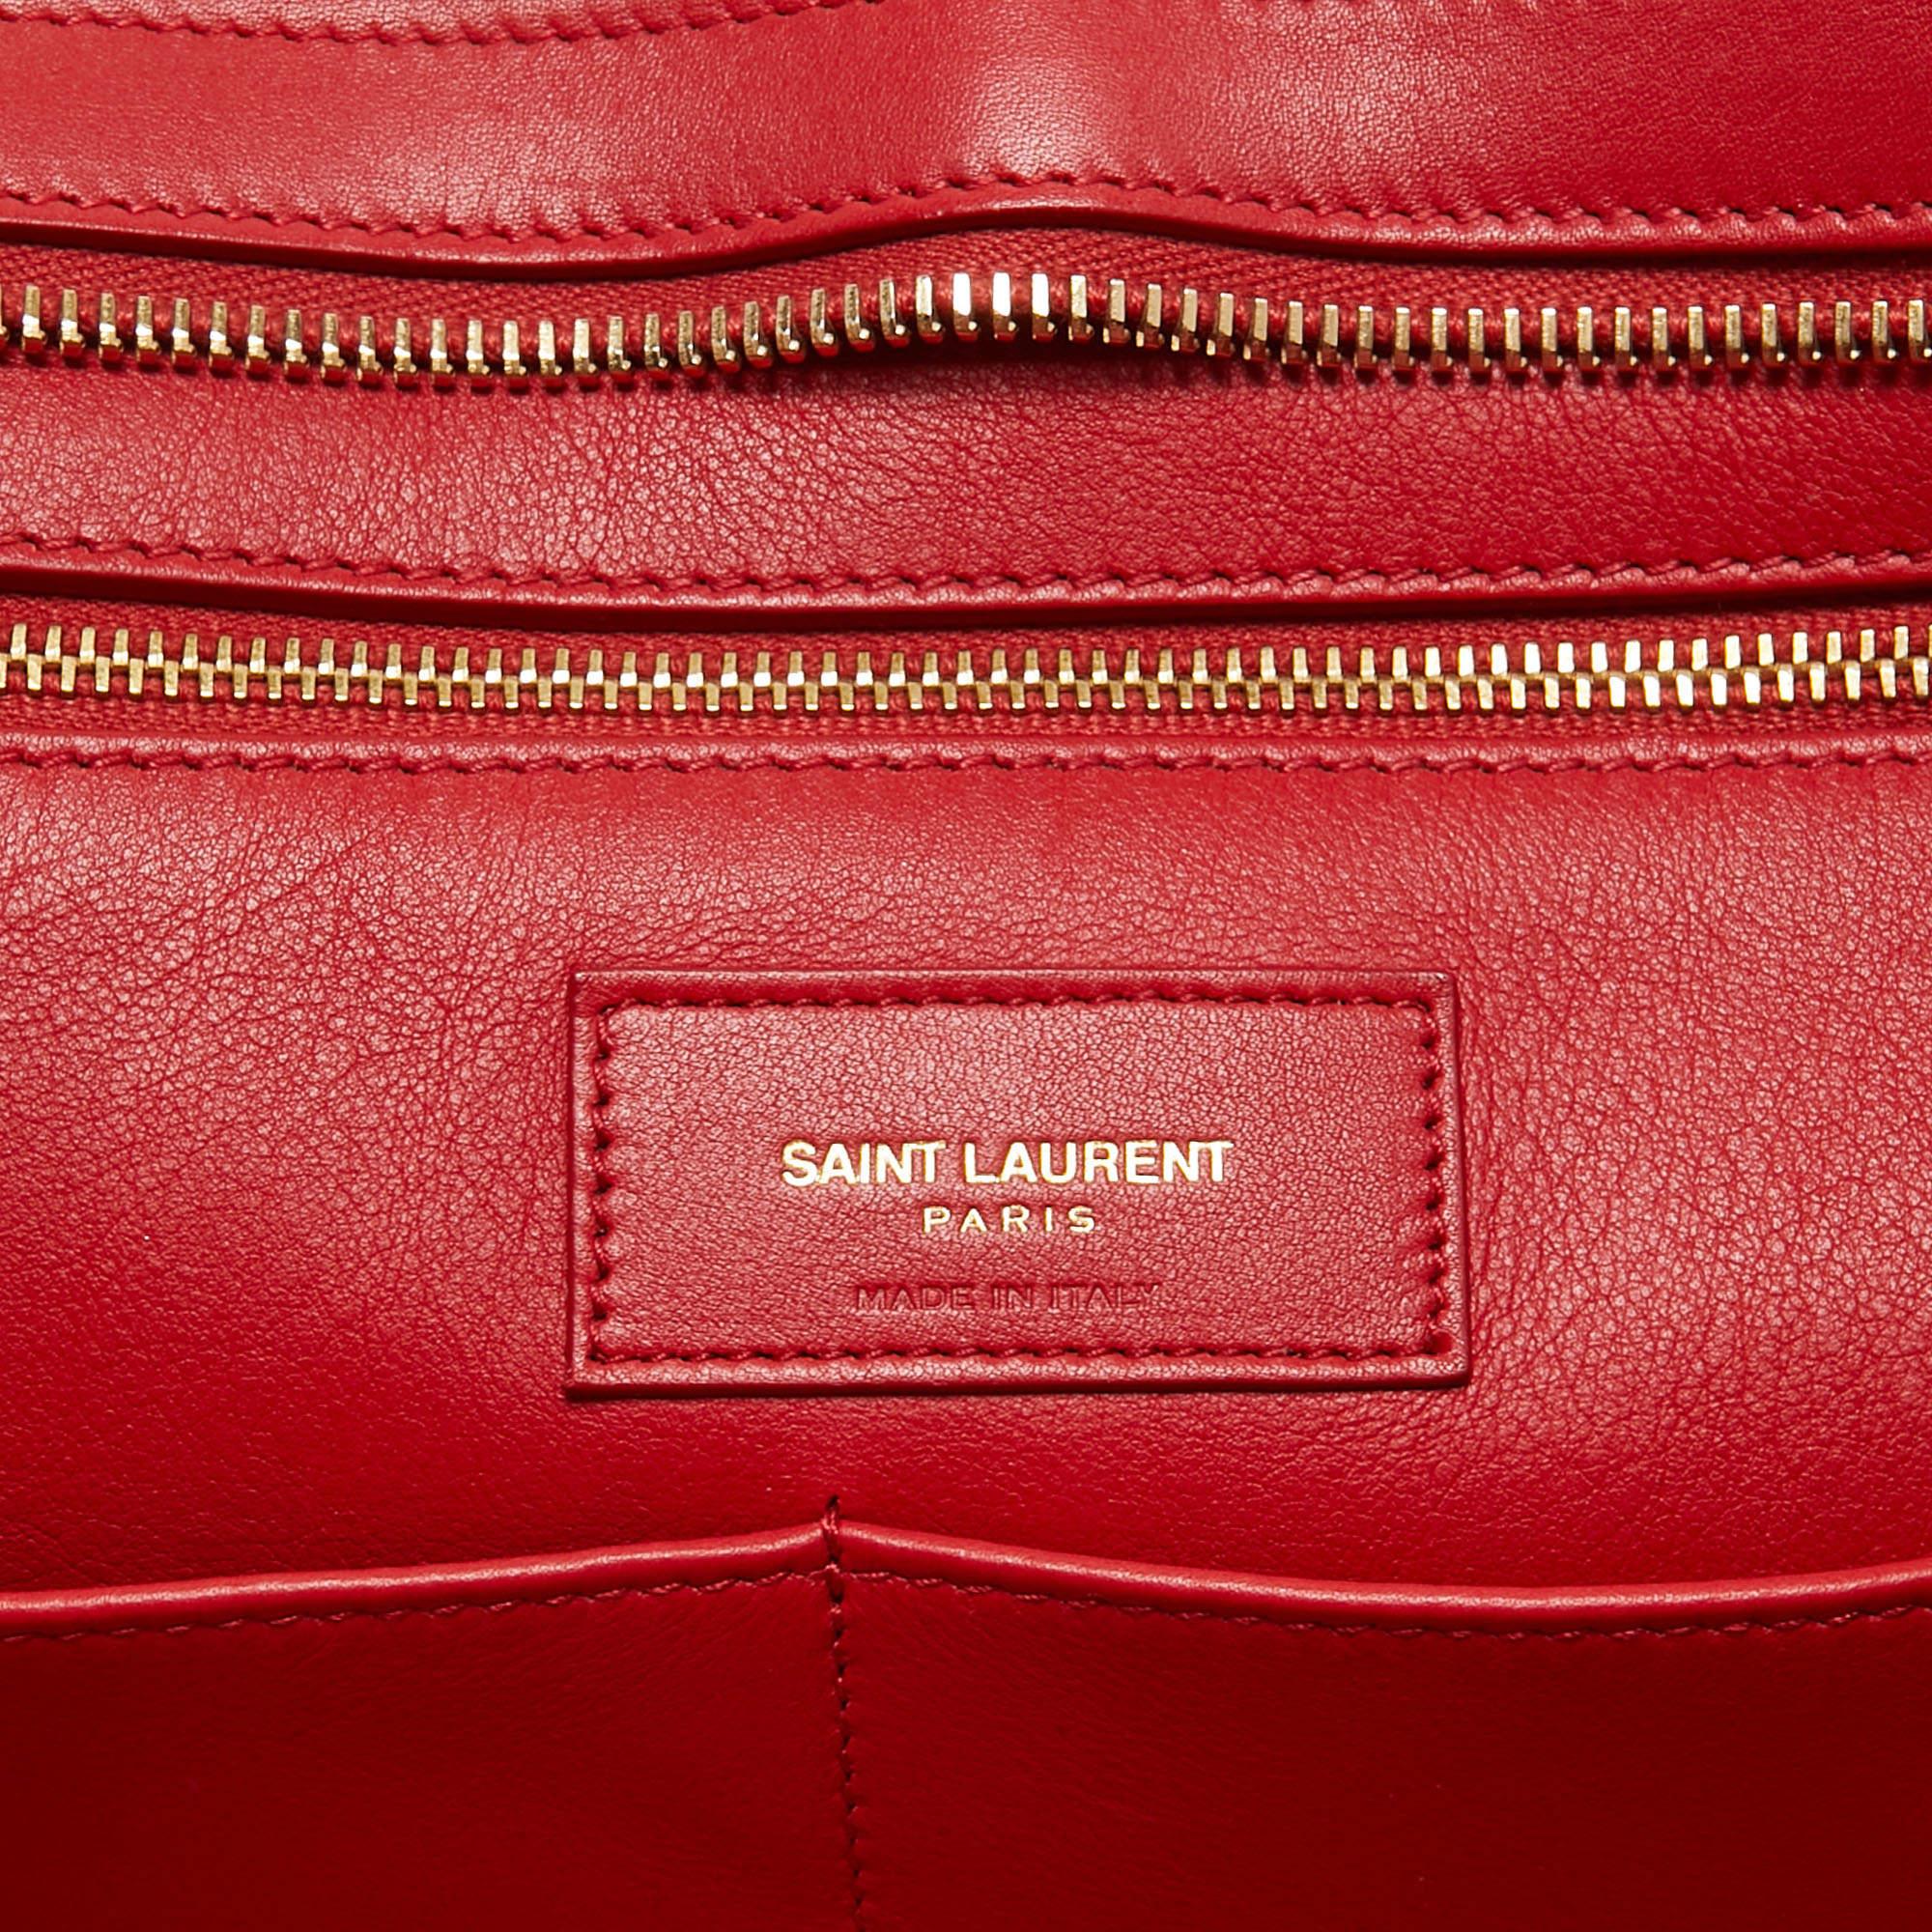 Saint Laurent Red Leather Medium Cabas Chyc Tote 7